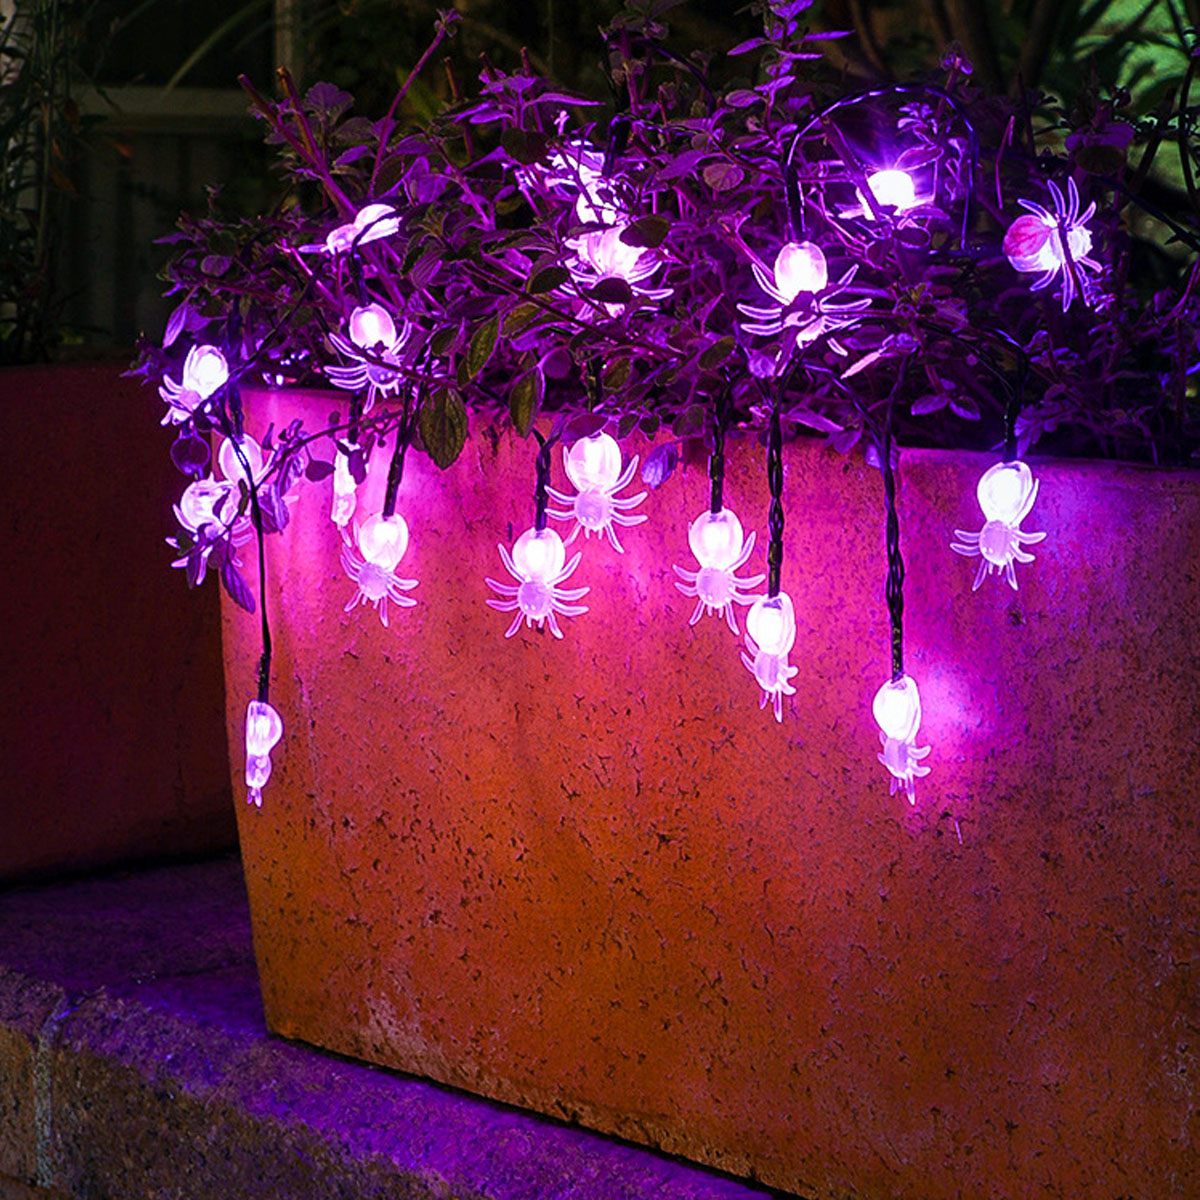 65M-30-LED-Ball-Solar-Halloween-Party-Fairy-Outdoor-String-Lights-for-Patio-Garden-8-Mode-Adjustment-1741092-10